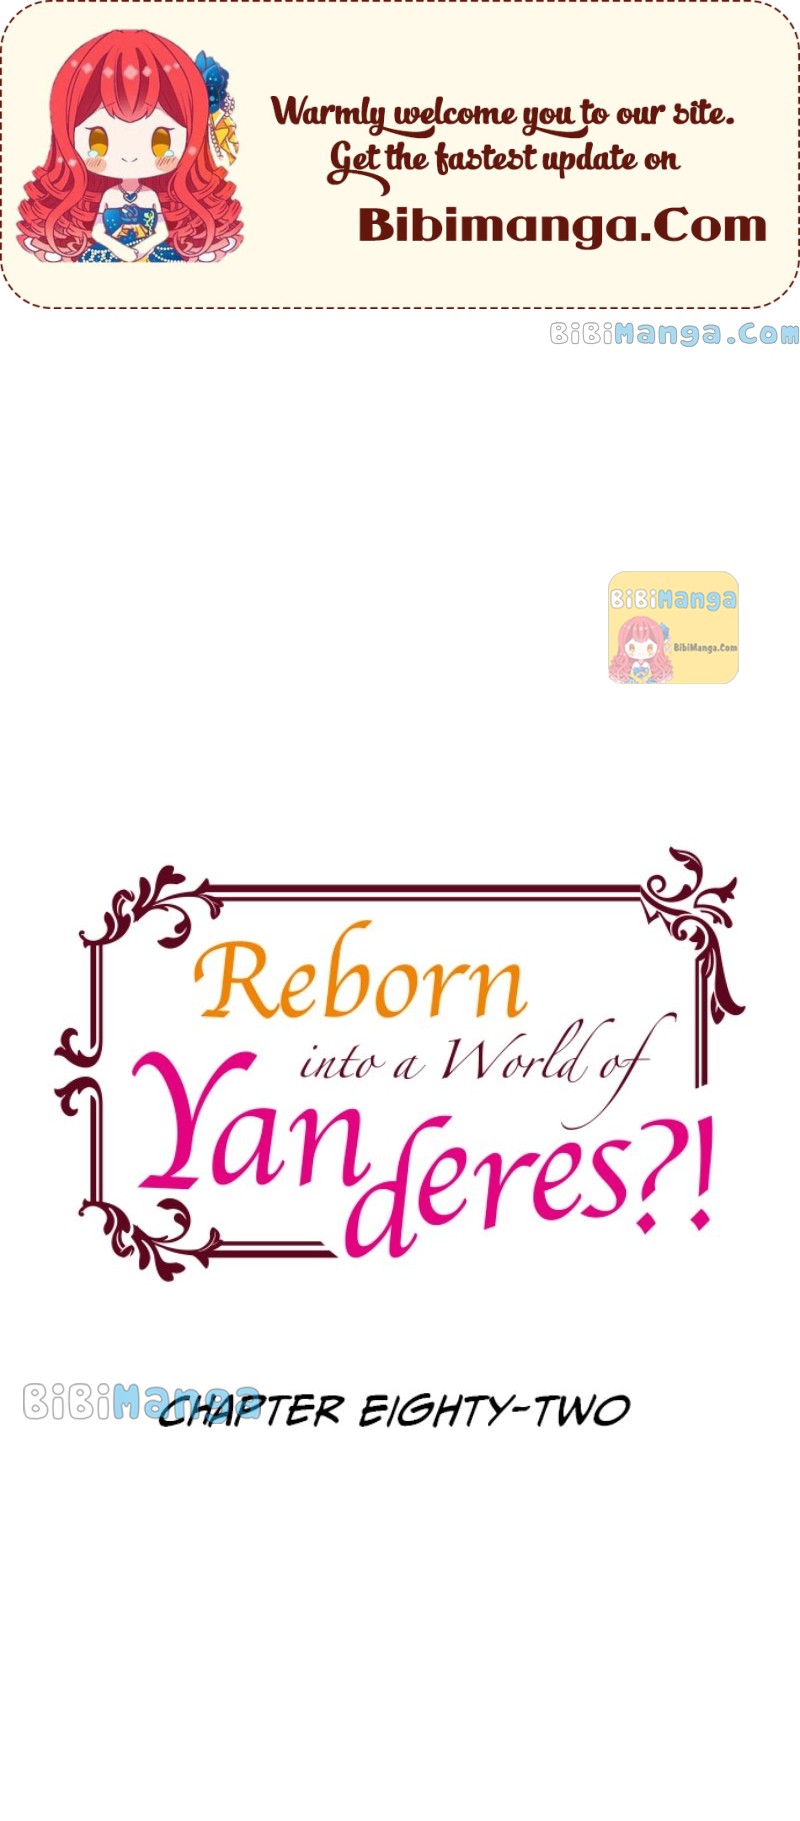 Reborn into a World of Yanderes?! Chapter 82